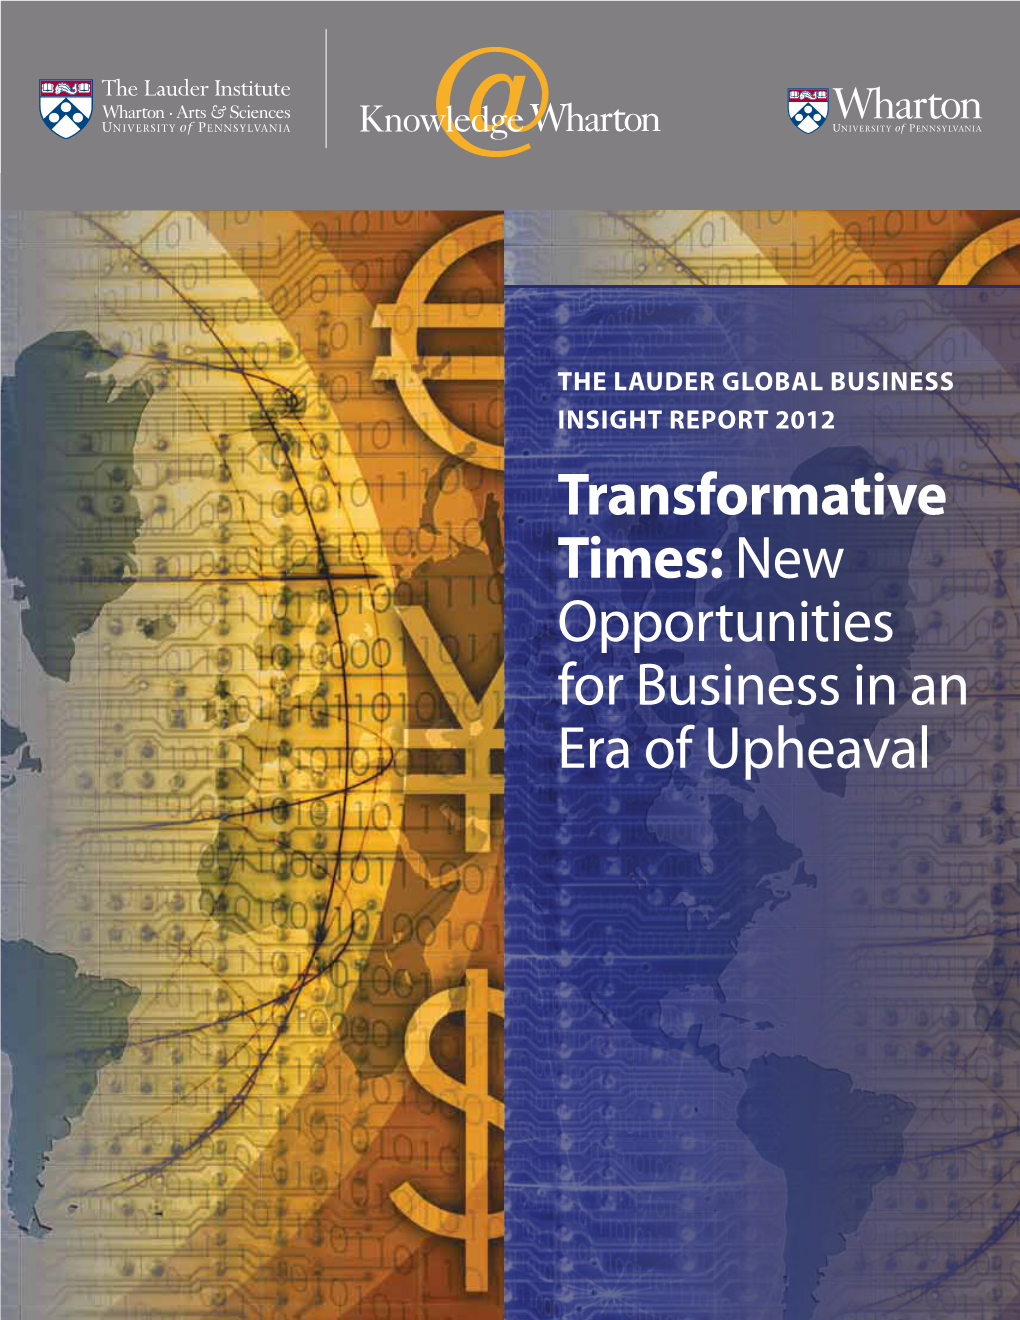 Transformative Times: New Opportunities for Business in an Era